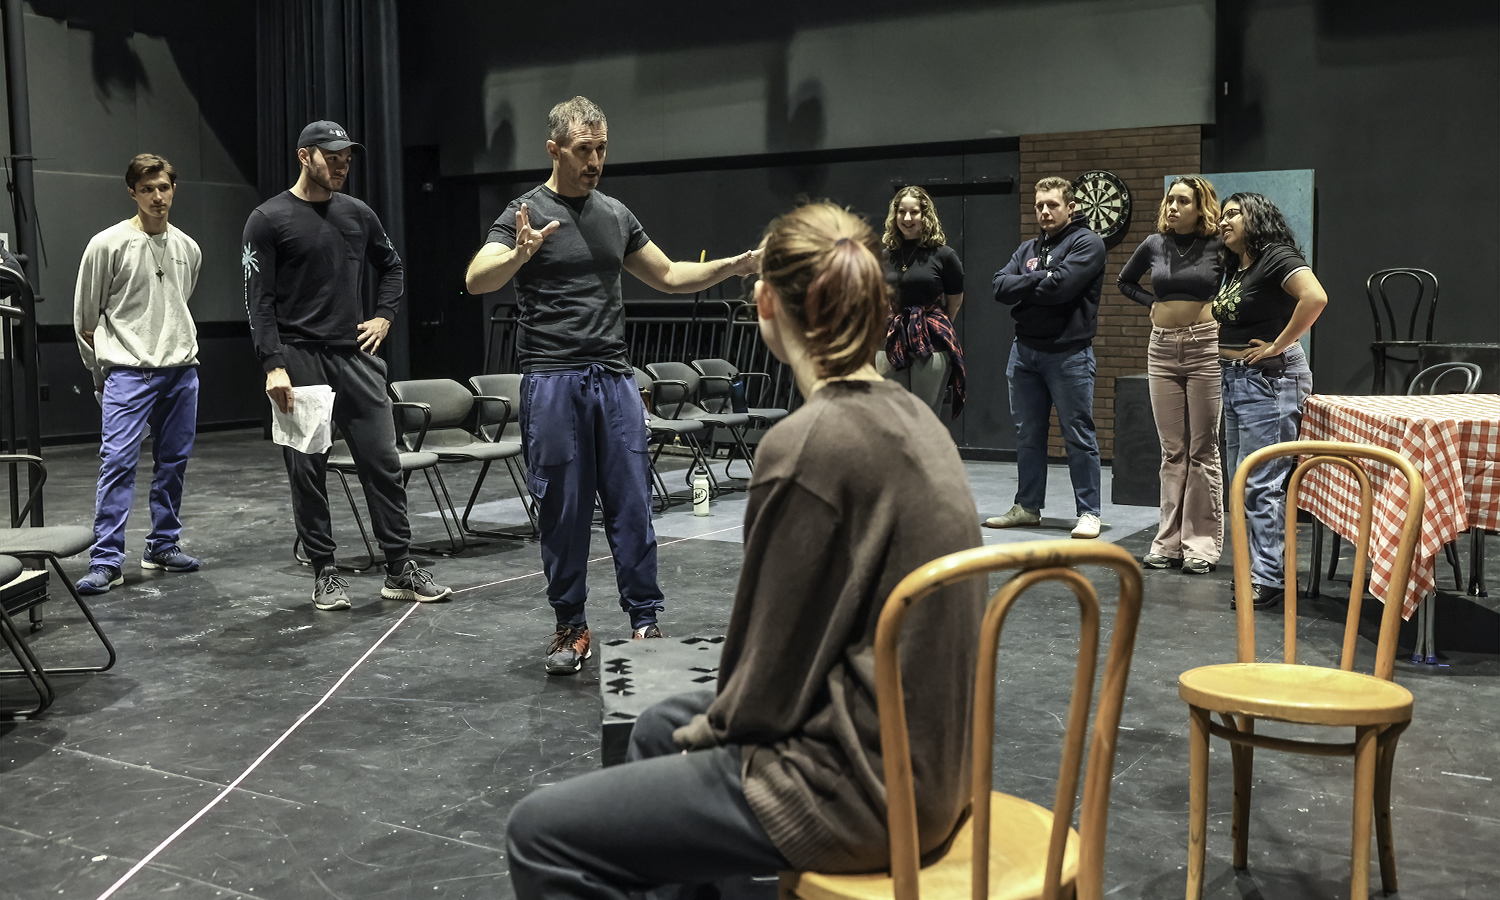 Associate Professor of Theatre Chris Hatch leads students during rehearsal for “Much Ado About Nothing” in the McDonald Theatre on Monday night.